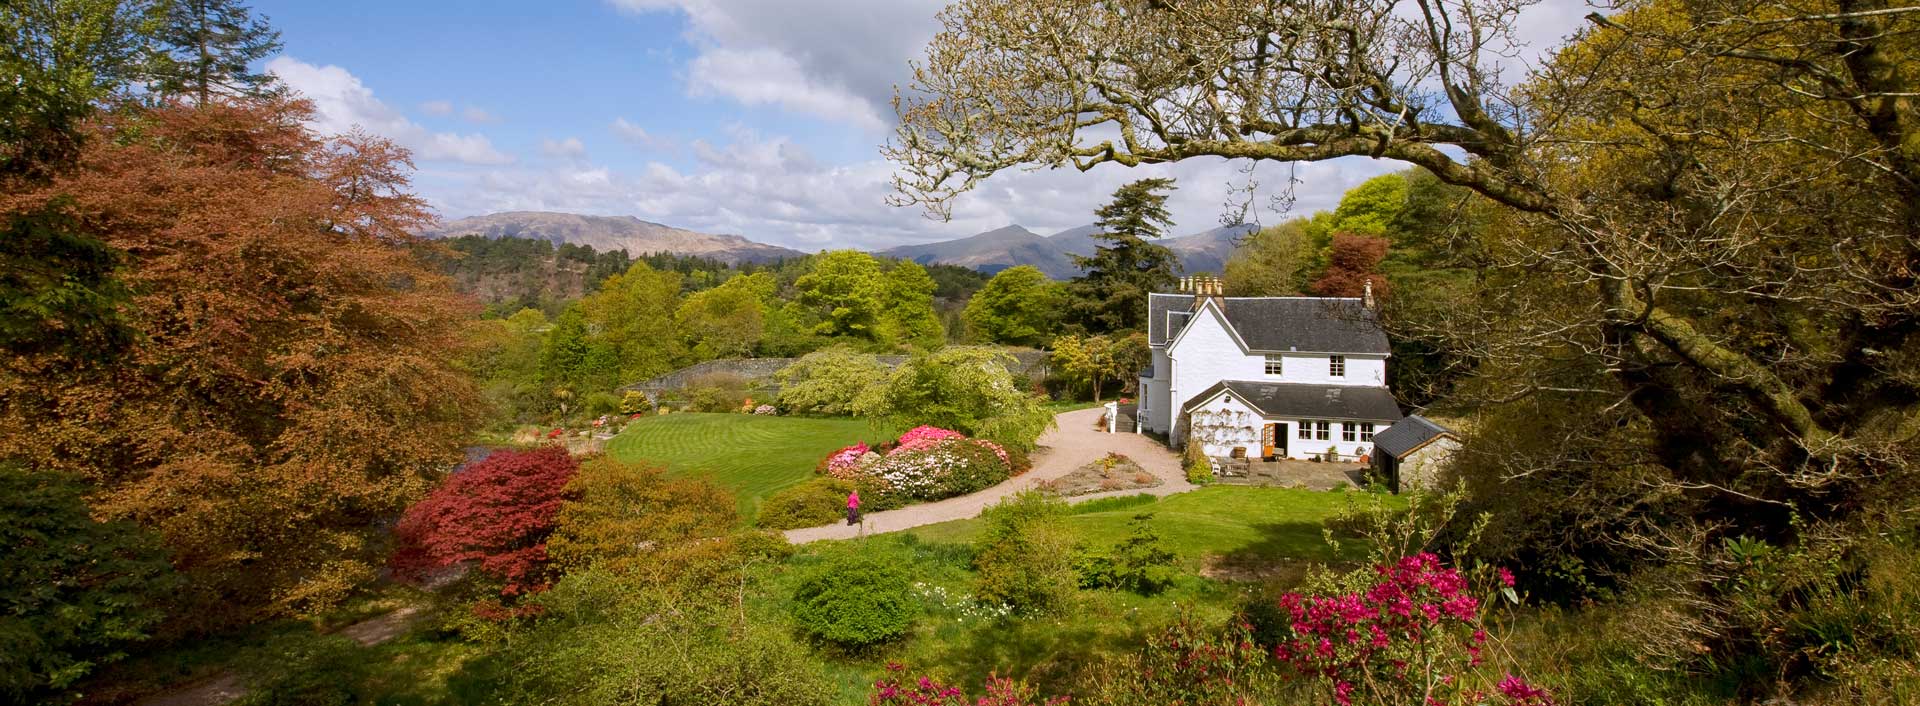 Druimneil House - country house bed and breakfast in Port Appin near Oban on the Argyll coast of Scotland